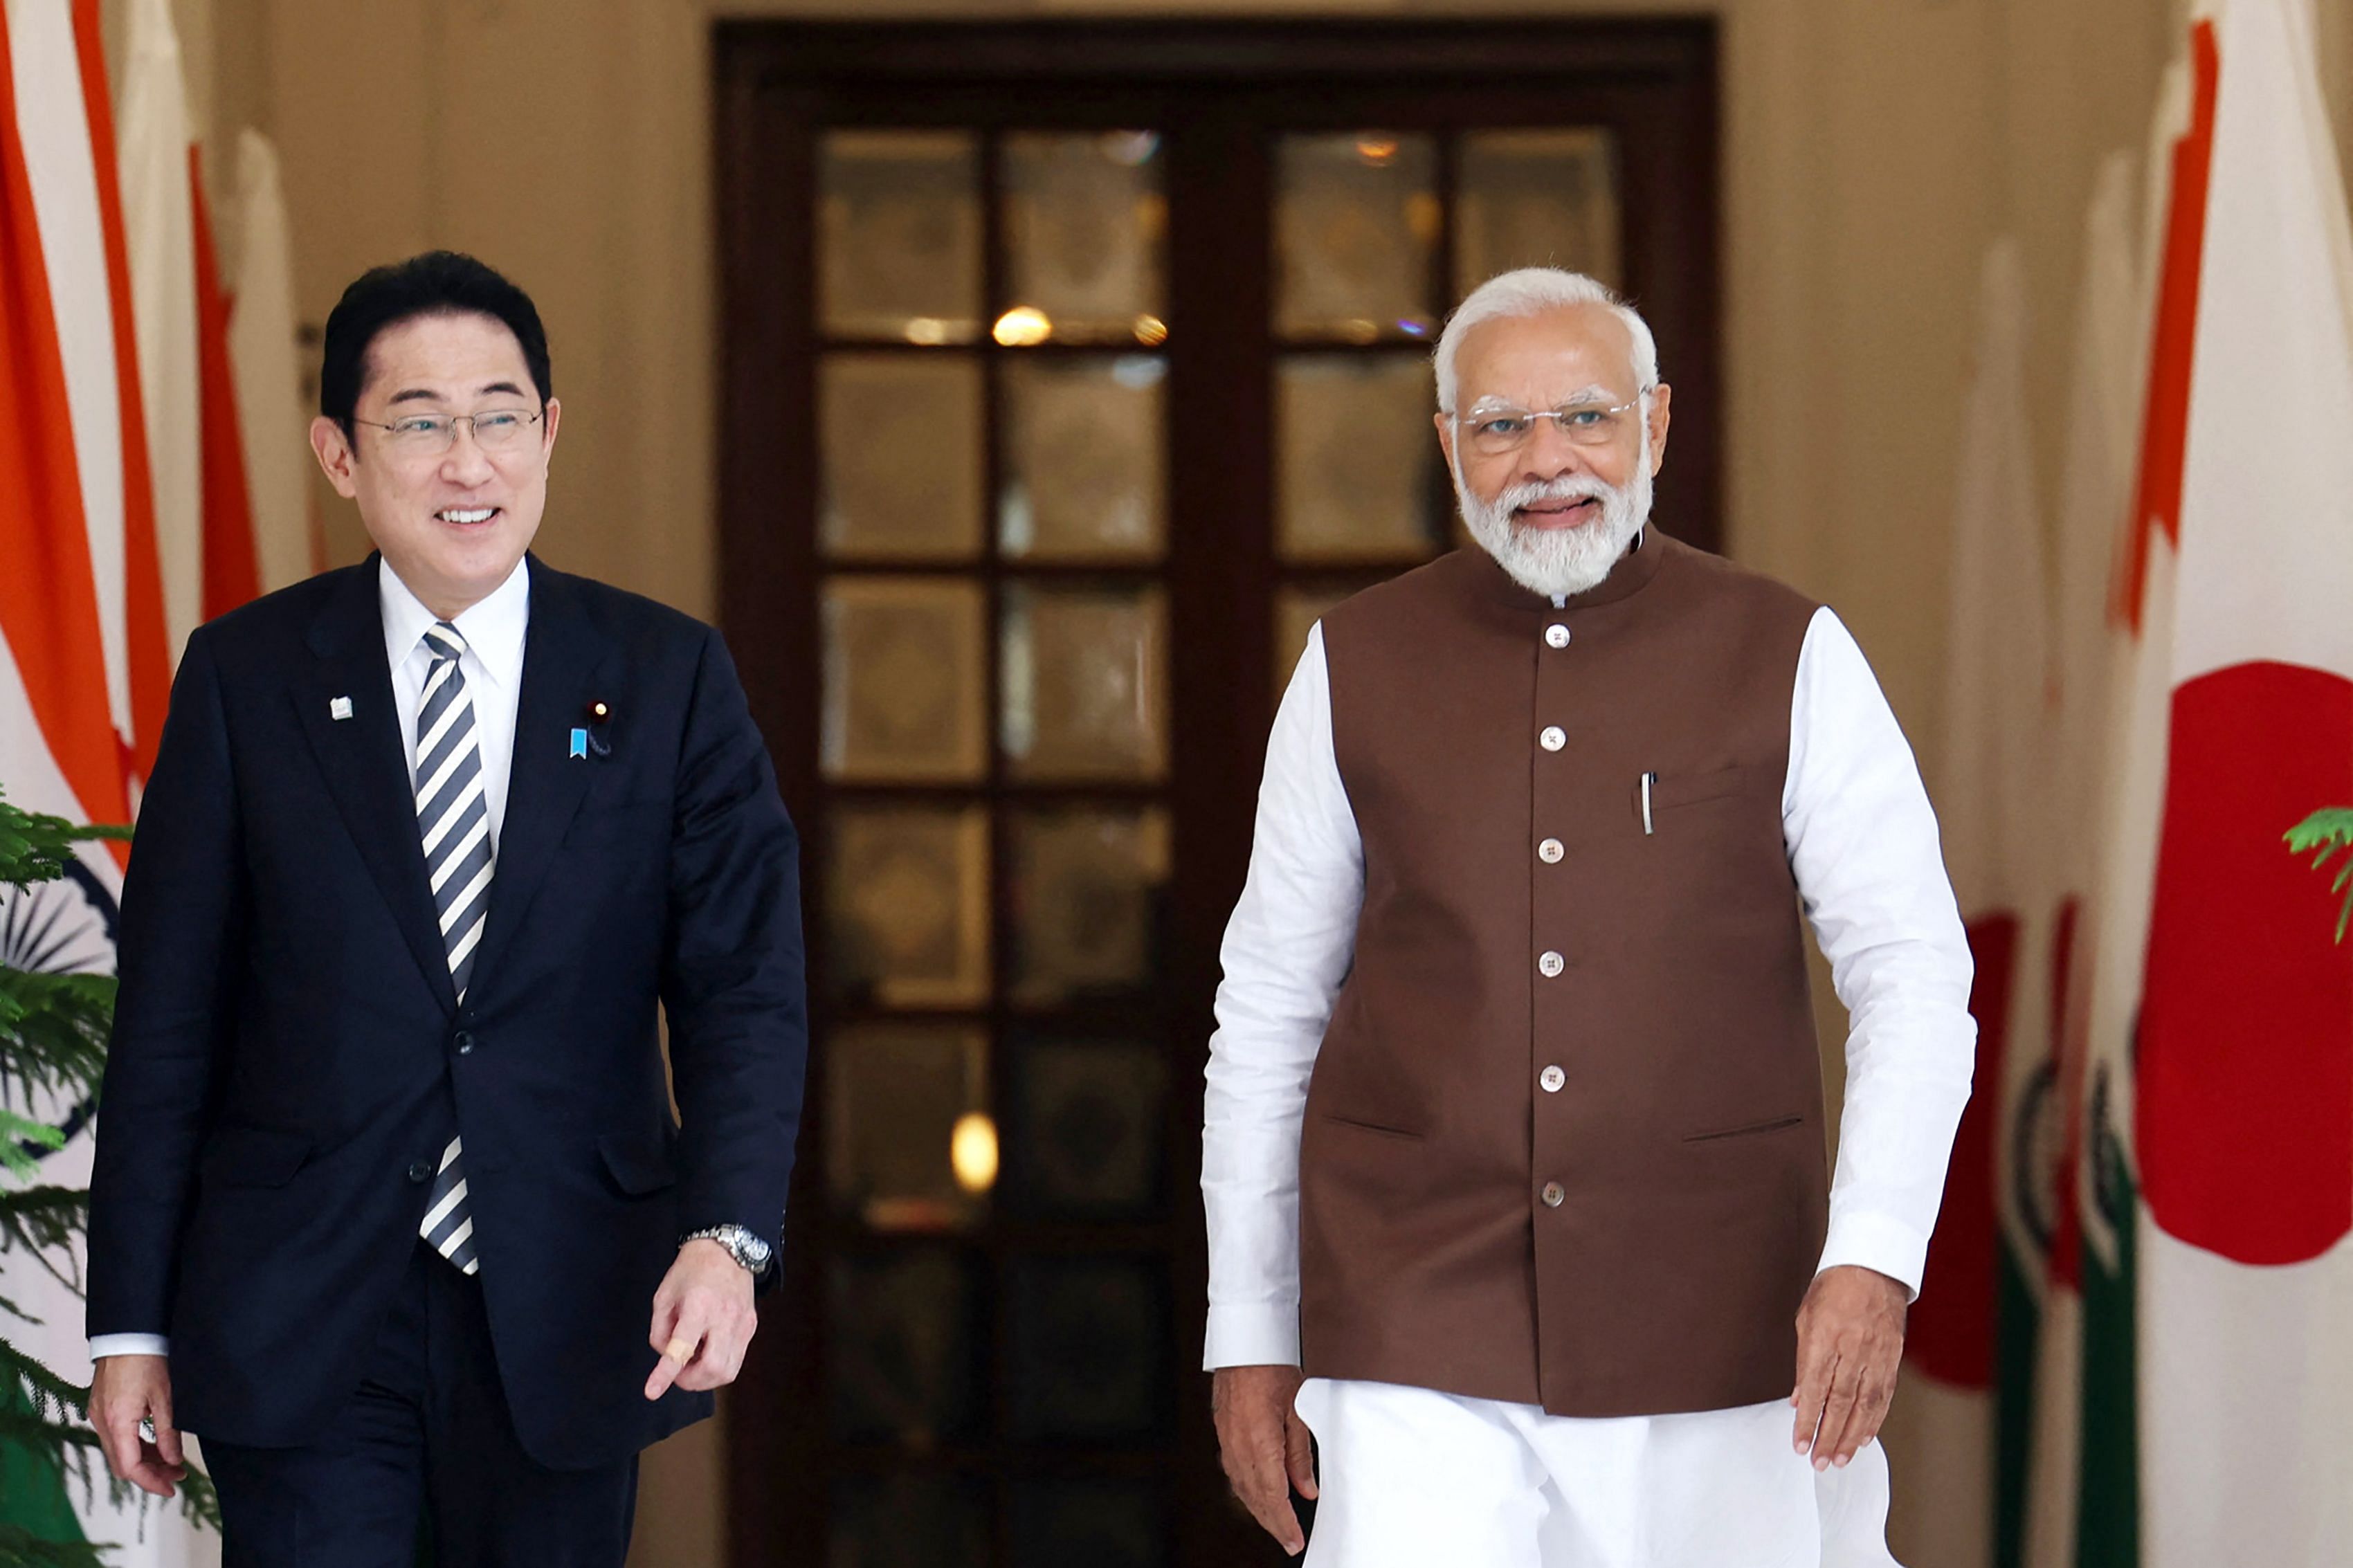 Japan's Prime Minister Fumio Kishida with PM Narendra Modi, before their meeting at the Hyderabad House in New Delhi, March 20, 2023. Credit: AFP/Indian Press Information Bureau